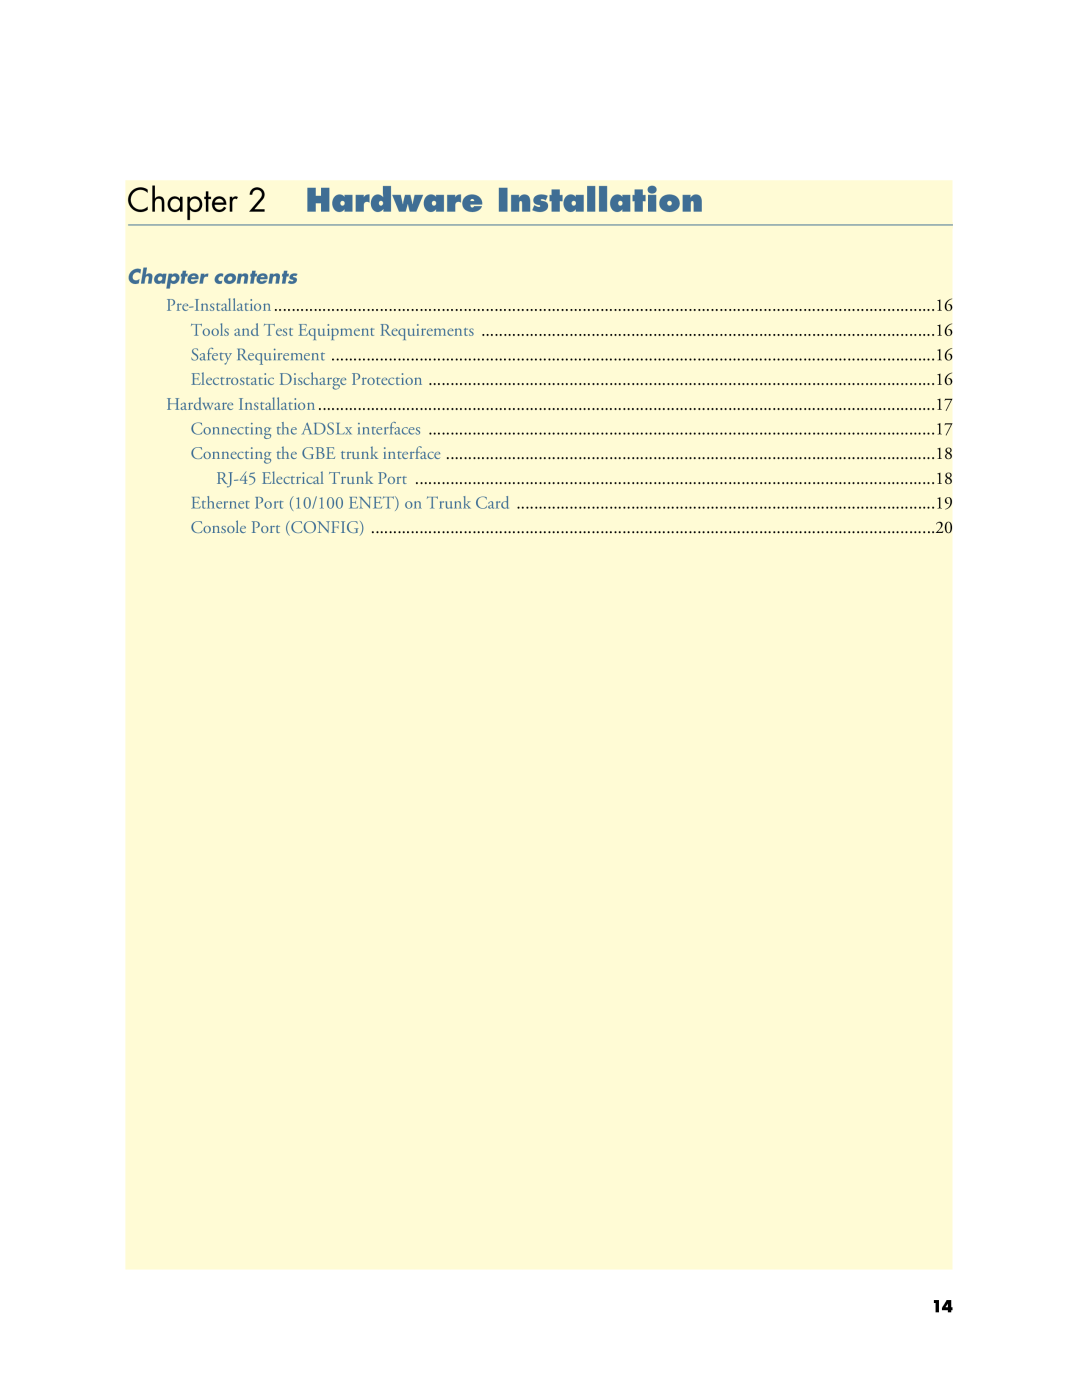 Patton electronic Model 3101RC manual Hardware Installation, Chapter contents 